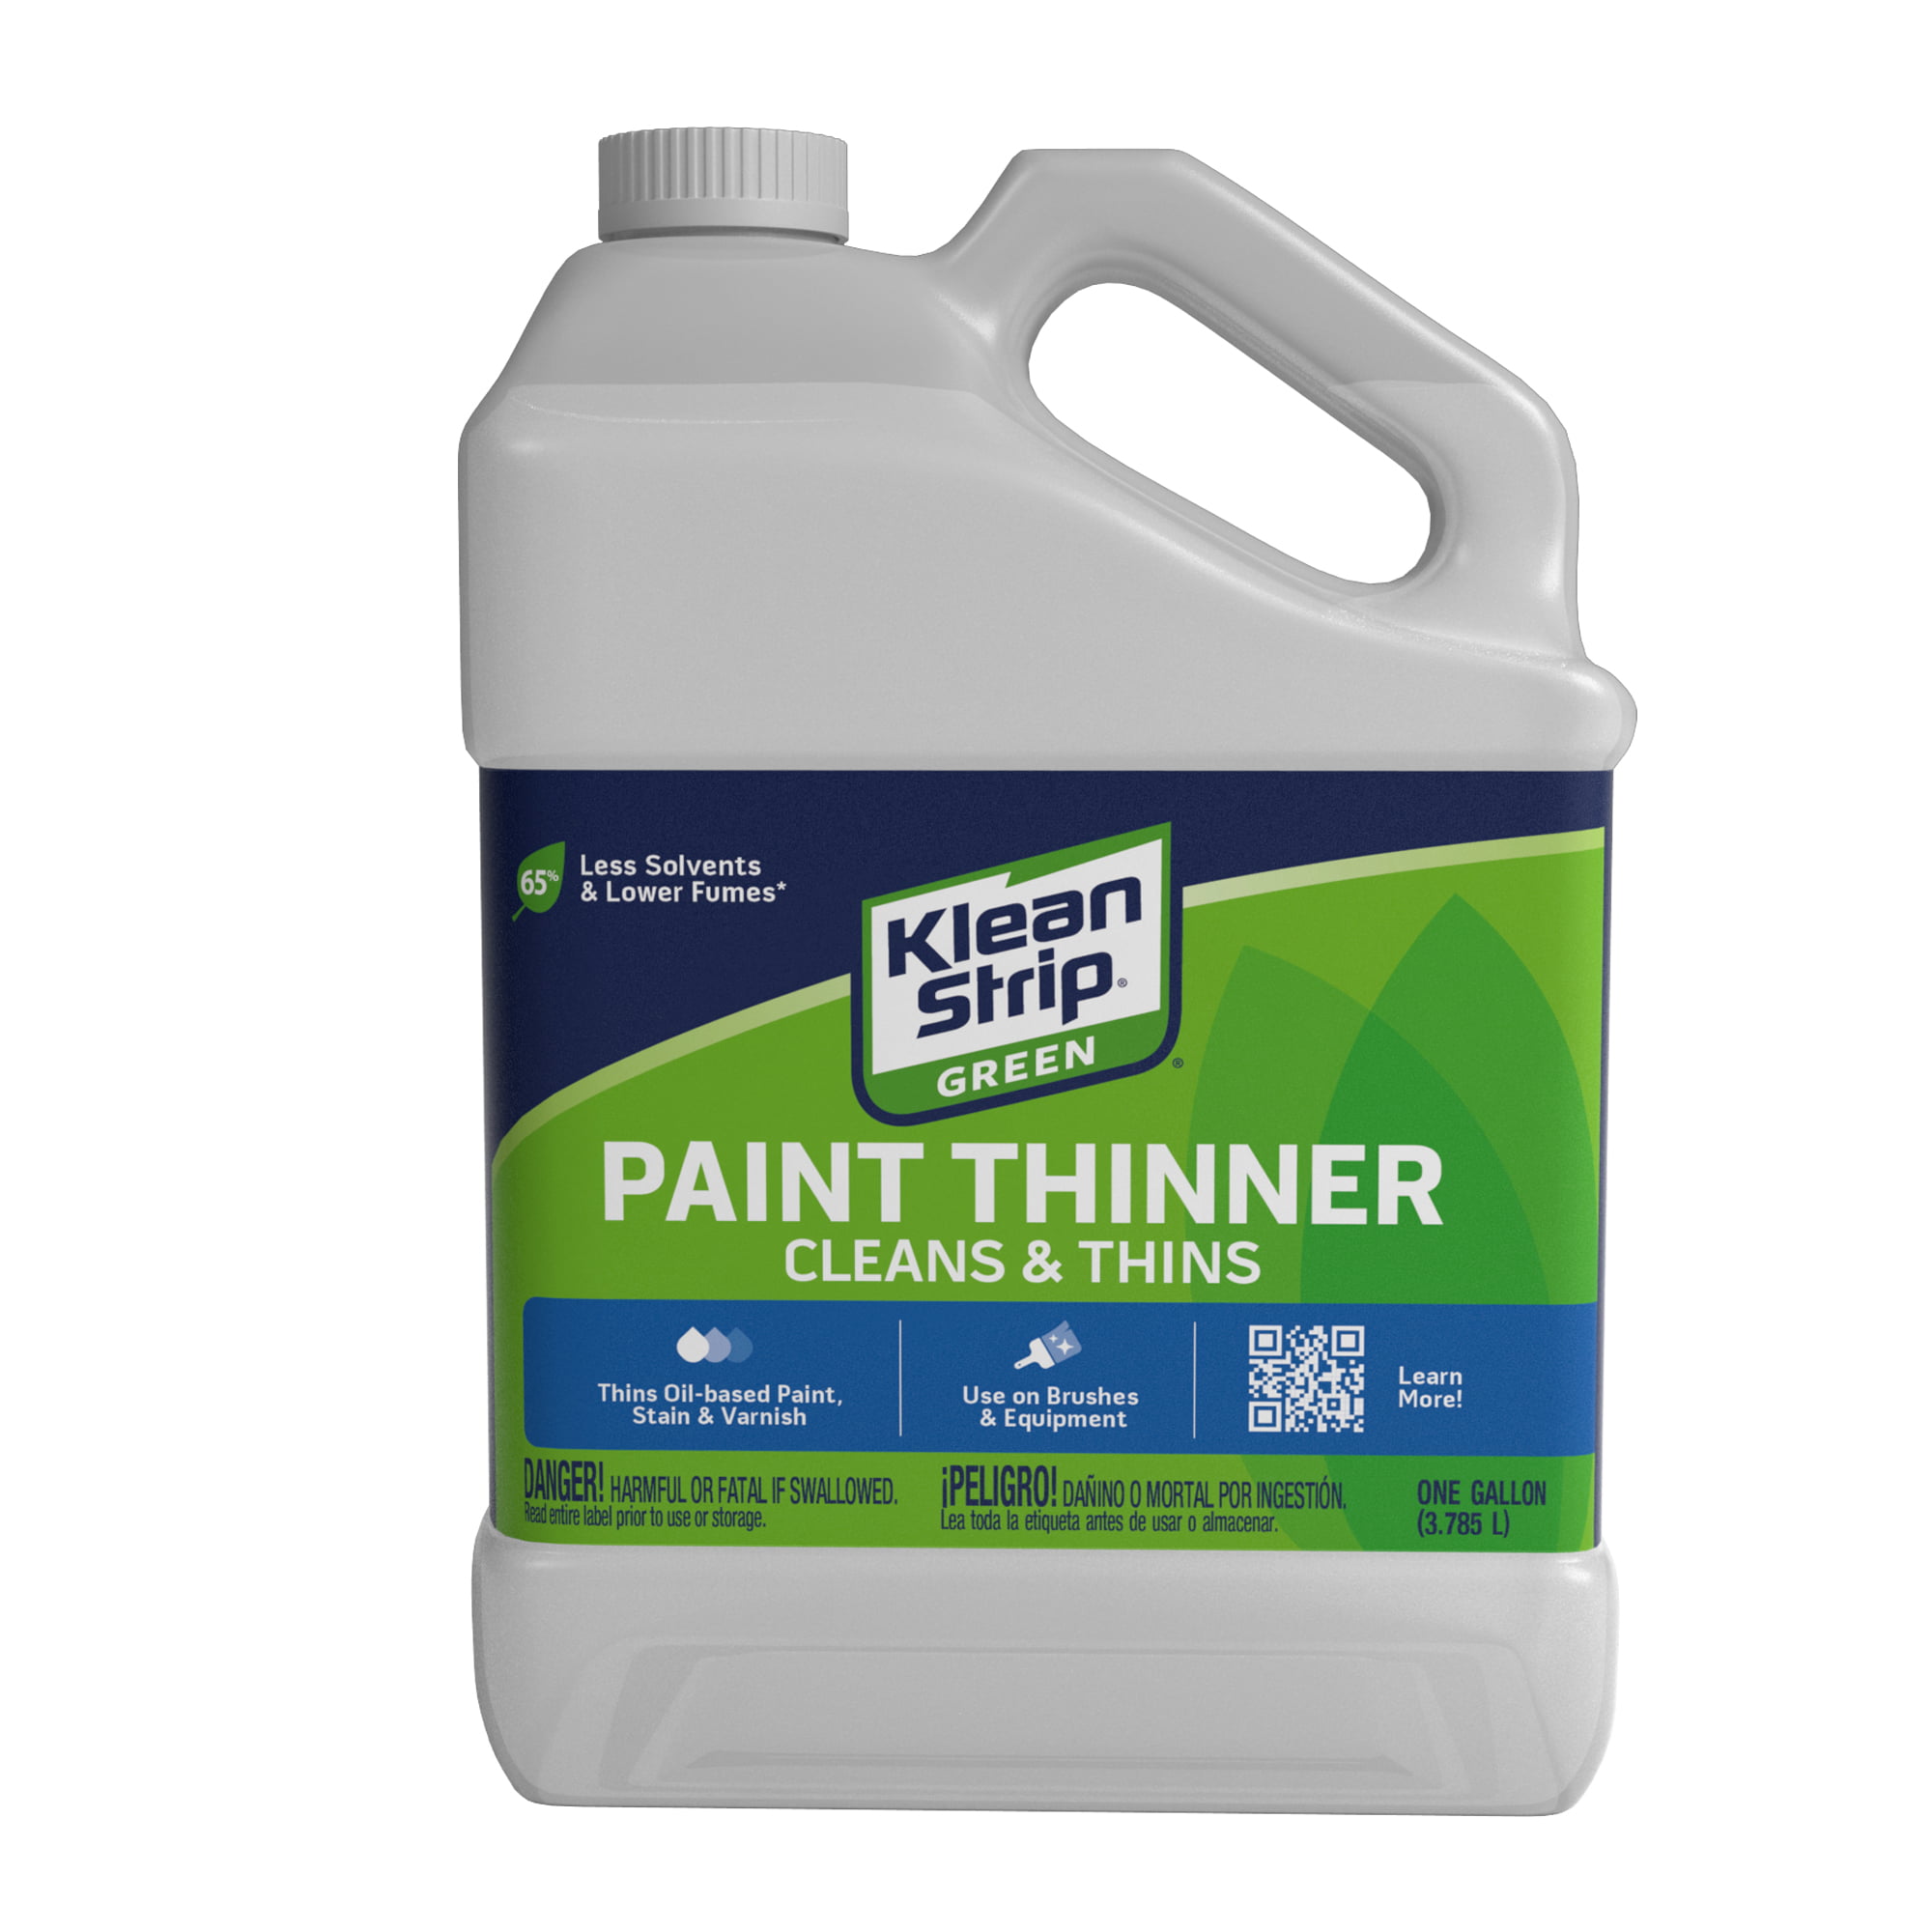 paint thinner label